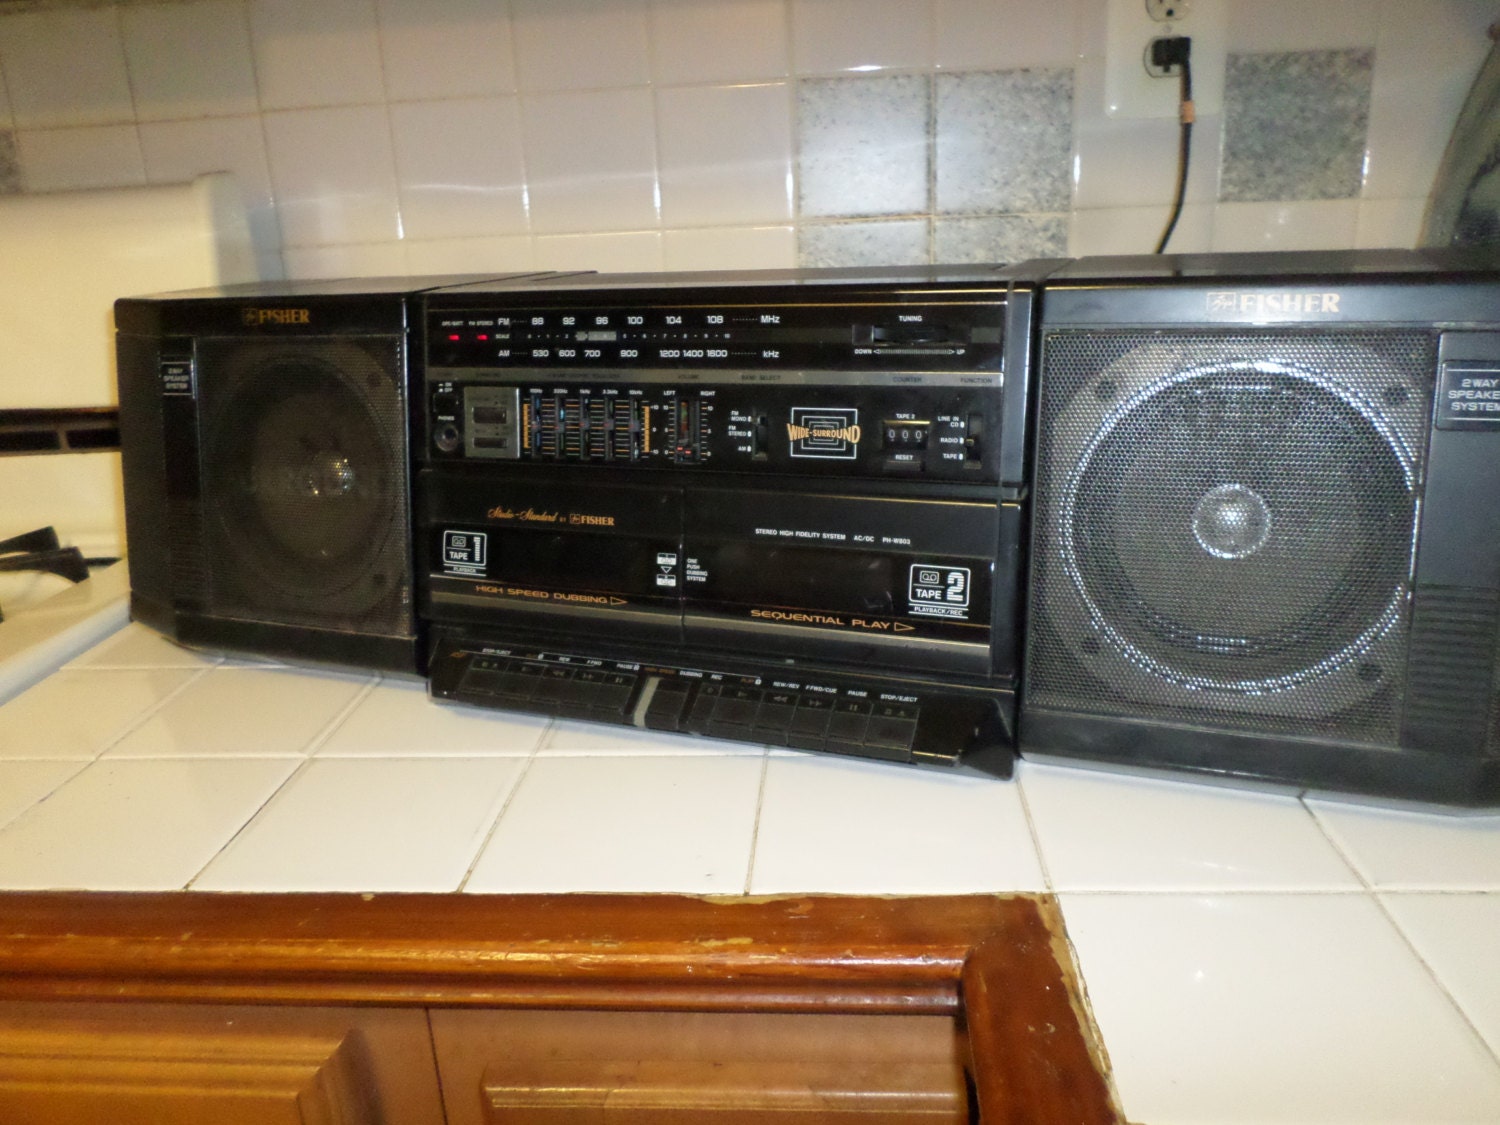 Very Nice Vintage 1980's Fisher Portable Stereo System